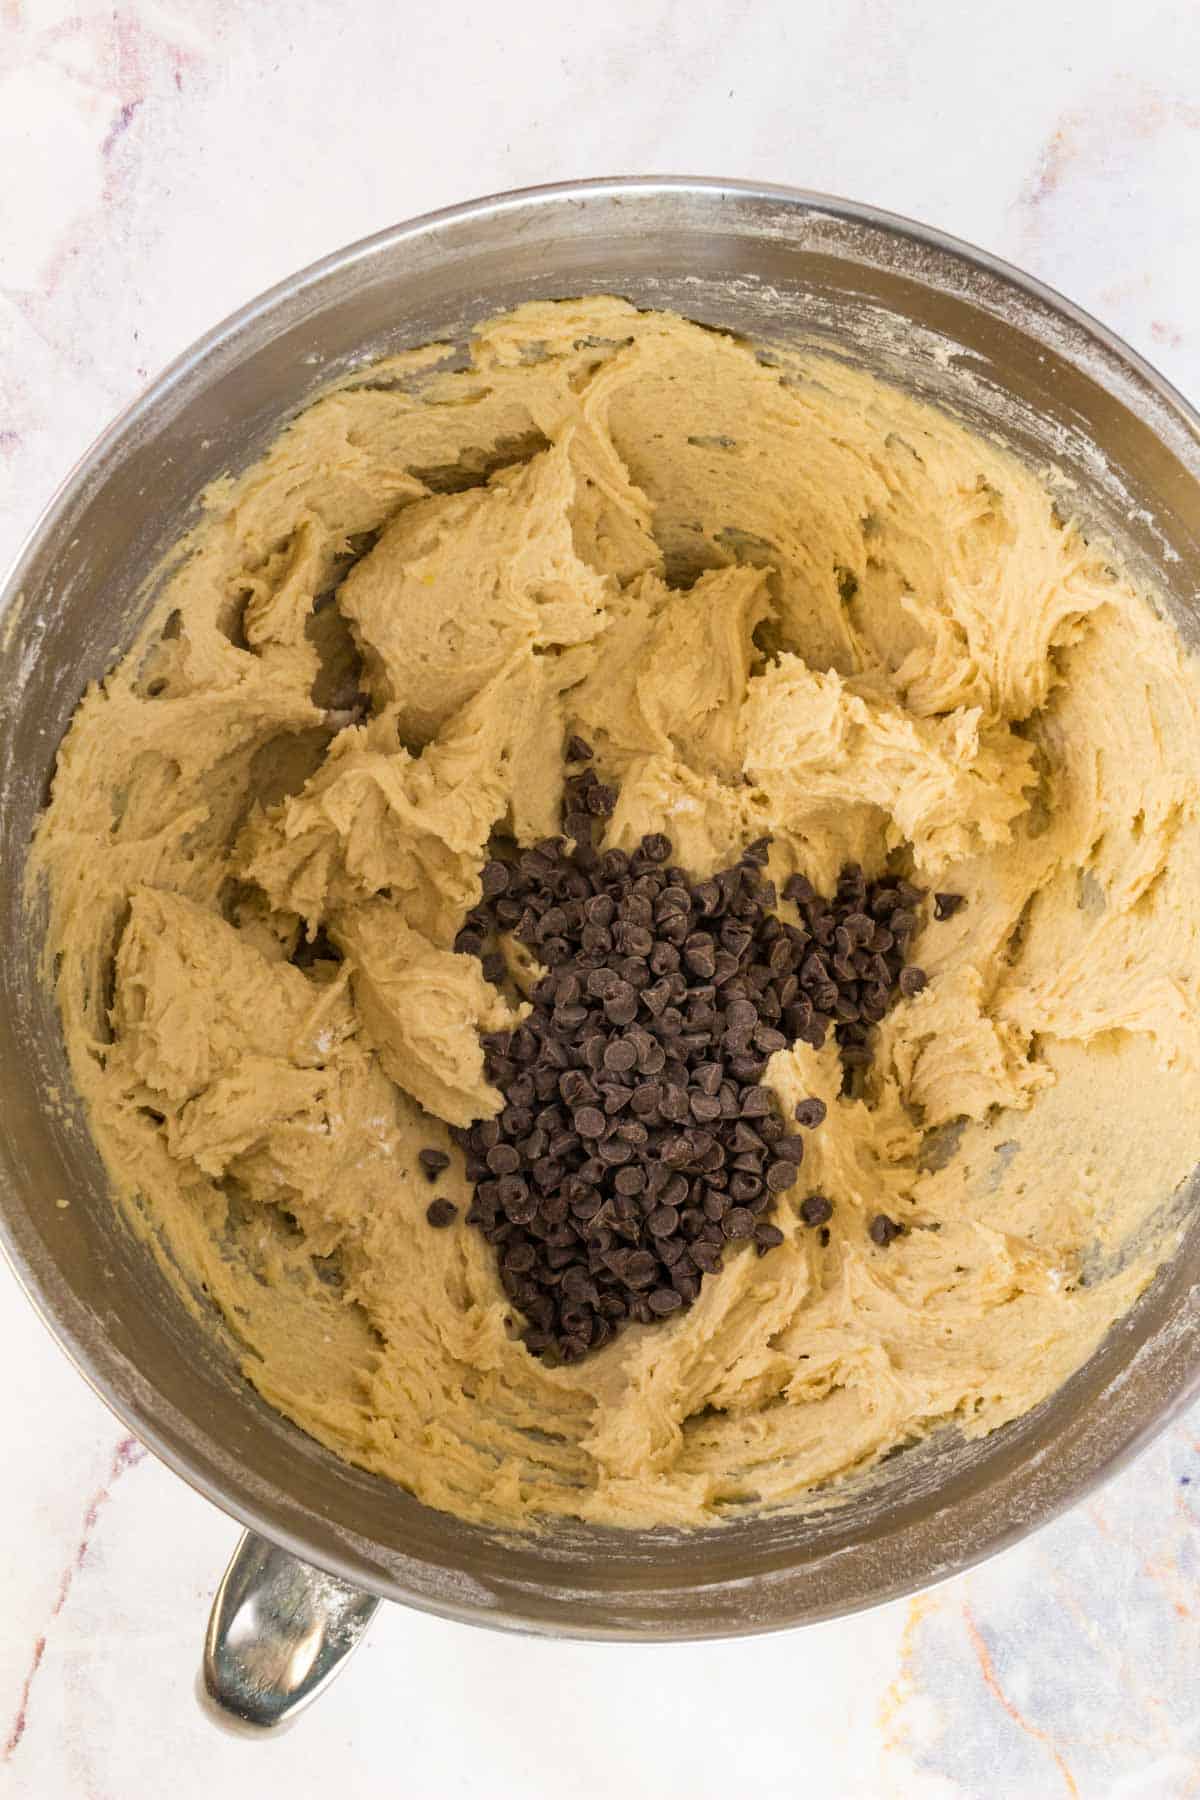 Mini chocolate chips are added into a mixing bowl with gluten free cookie dough.